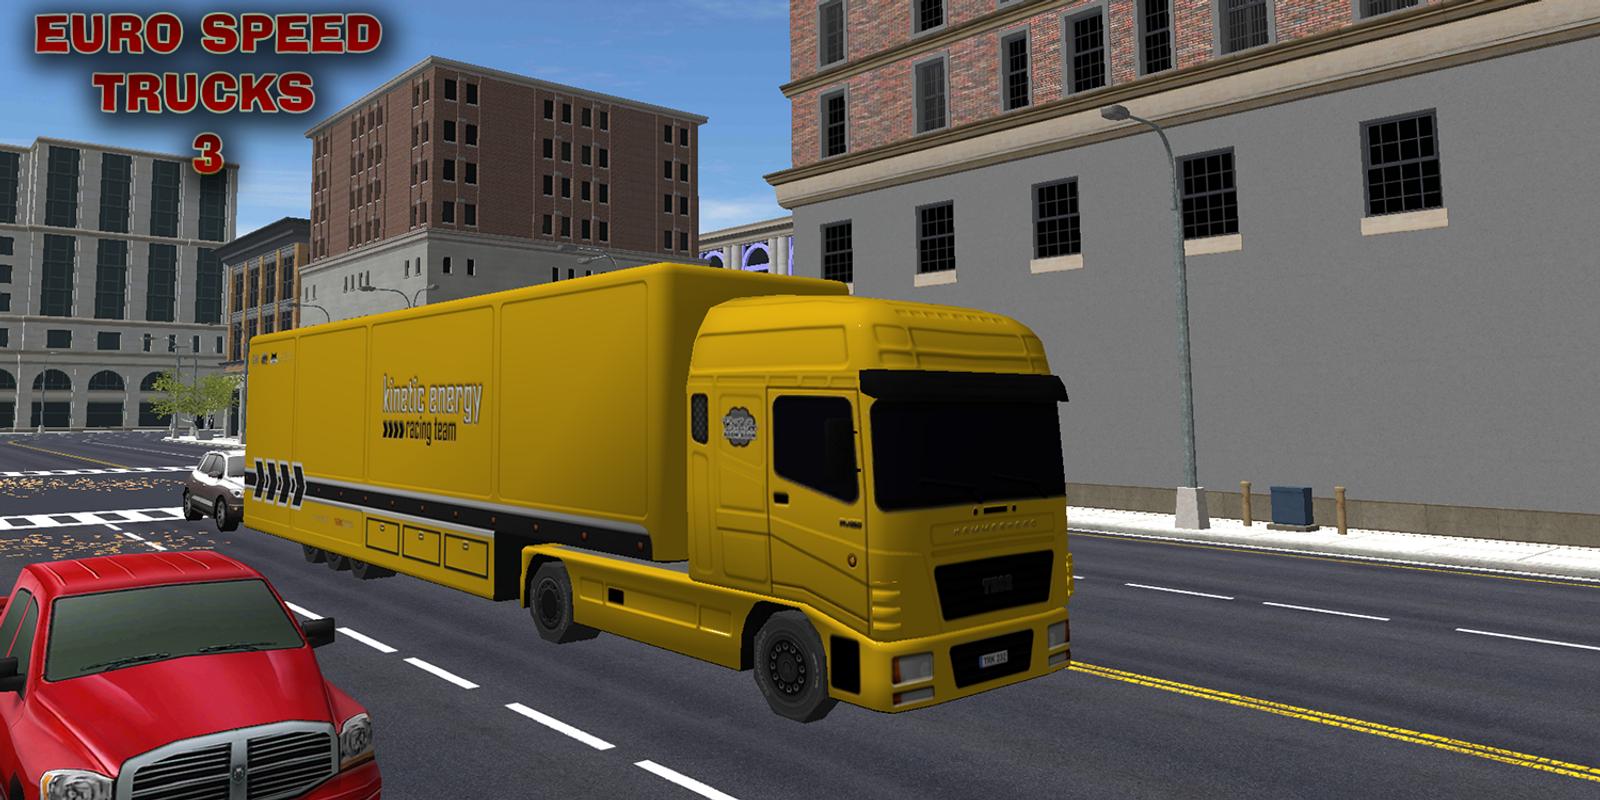 EURO SPEED TRUCKS 3 2017 for Android - APK Download